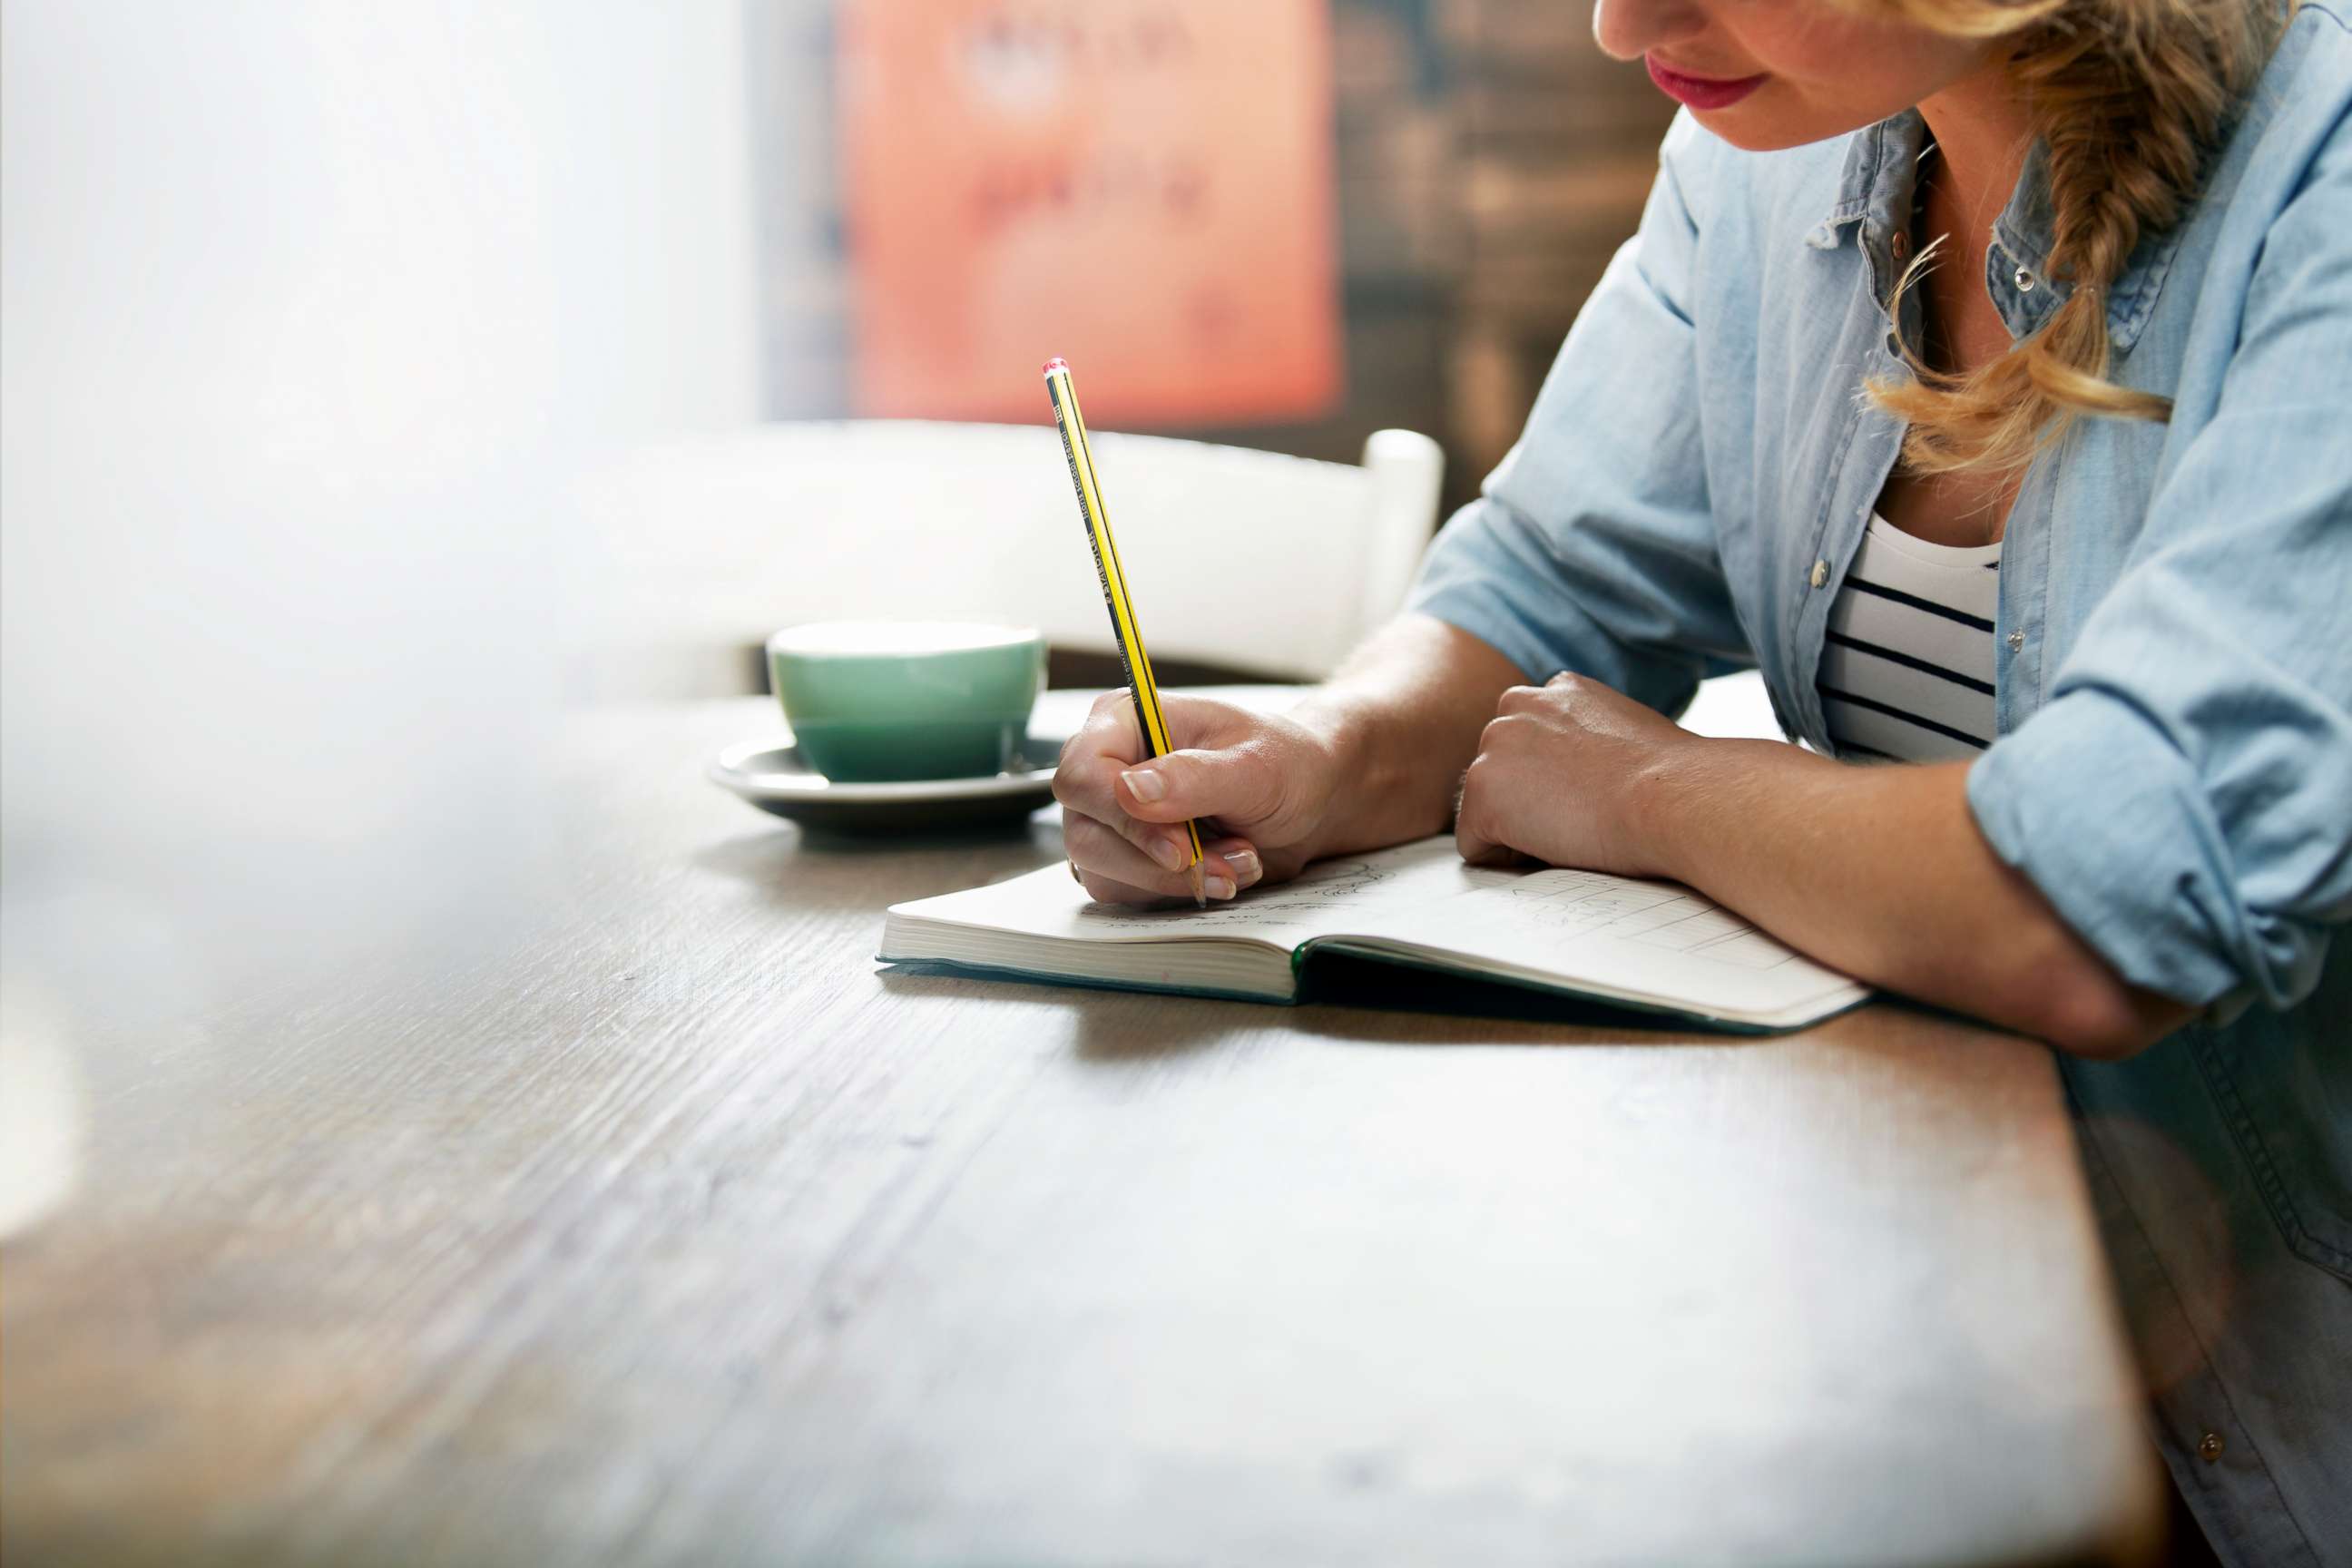 PHOTO: A woman writes in this stock photo.